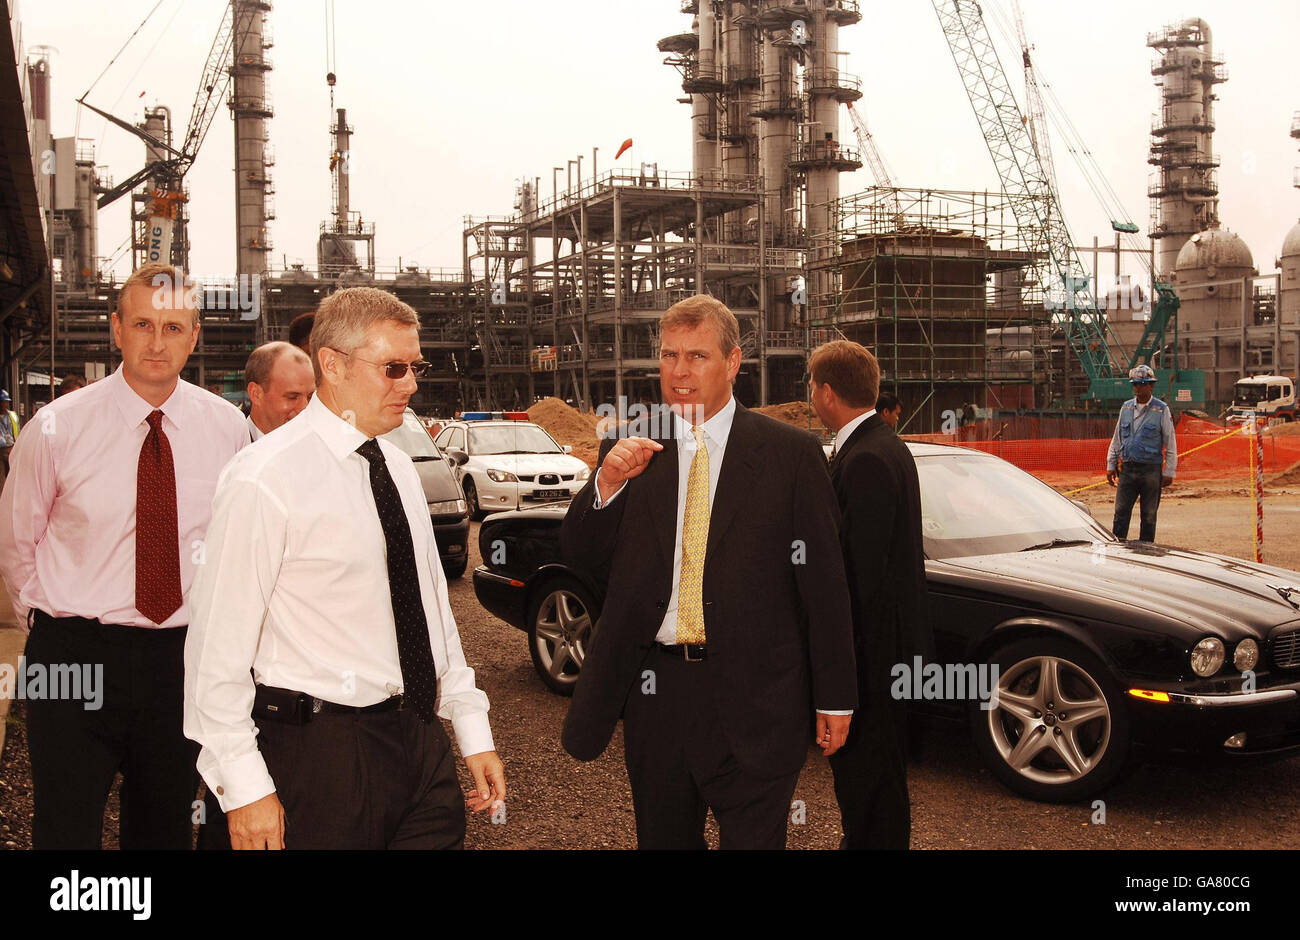 The Duke of York, who is the UK special representative for Trade and Investment, talks to Geoff Muir (glasses) senior project manager at the building of the British Company Lucite International perspex plant, being constructed on Jurong Island Singapore. Stock Photo